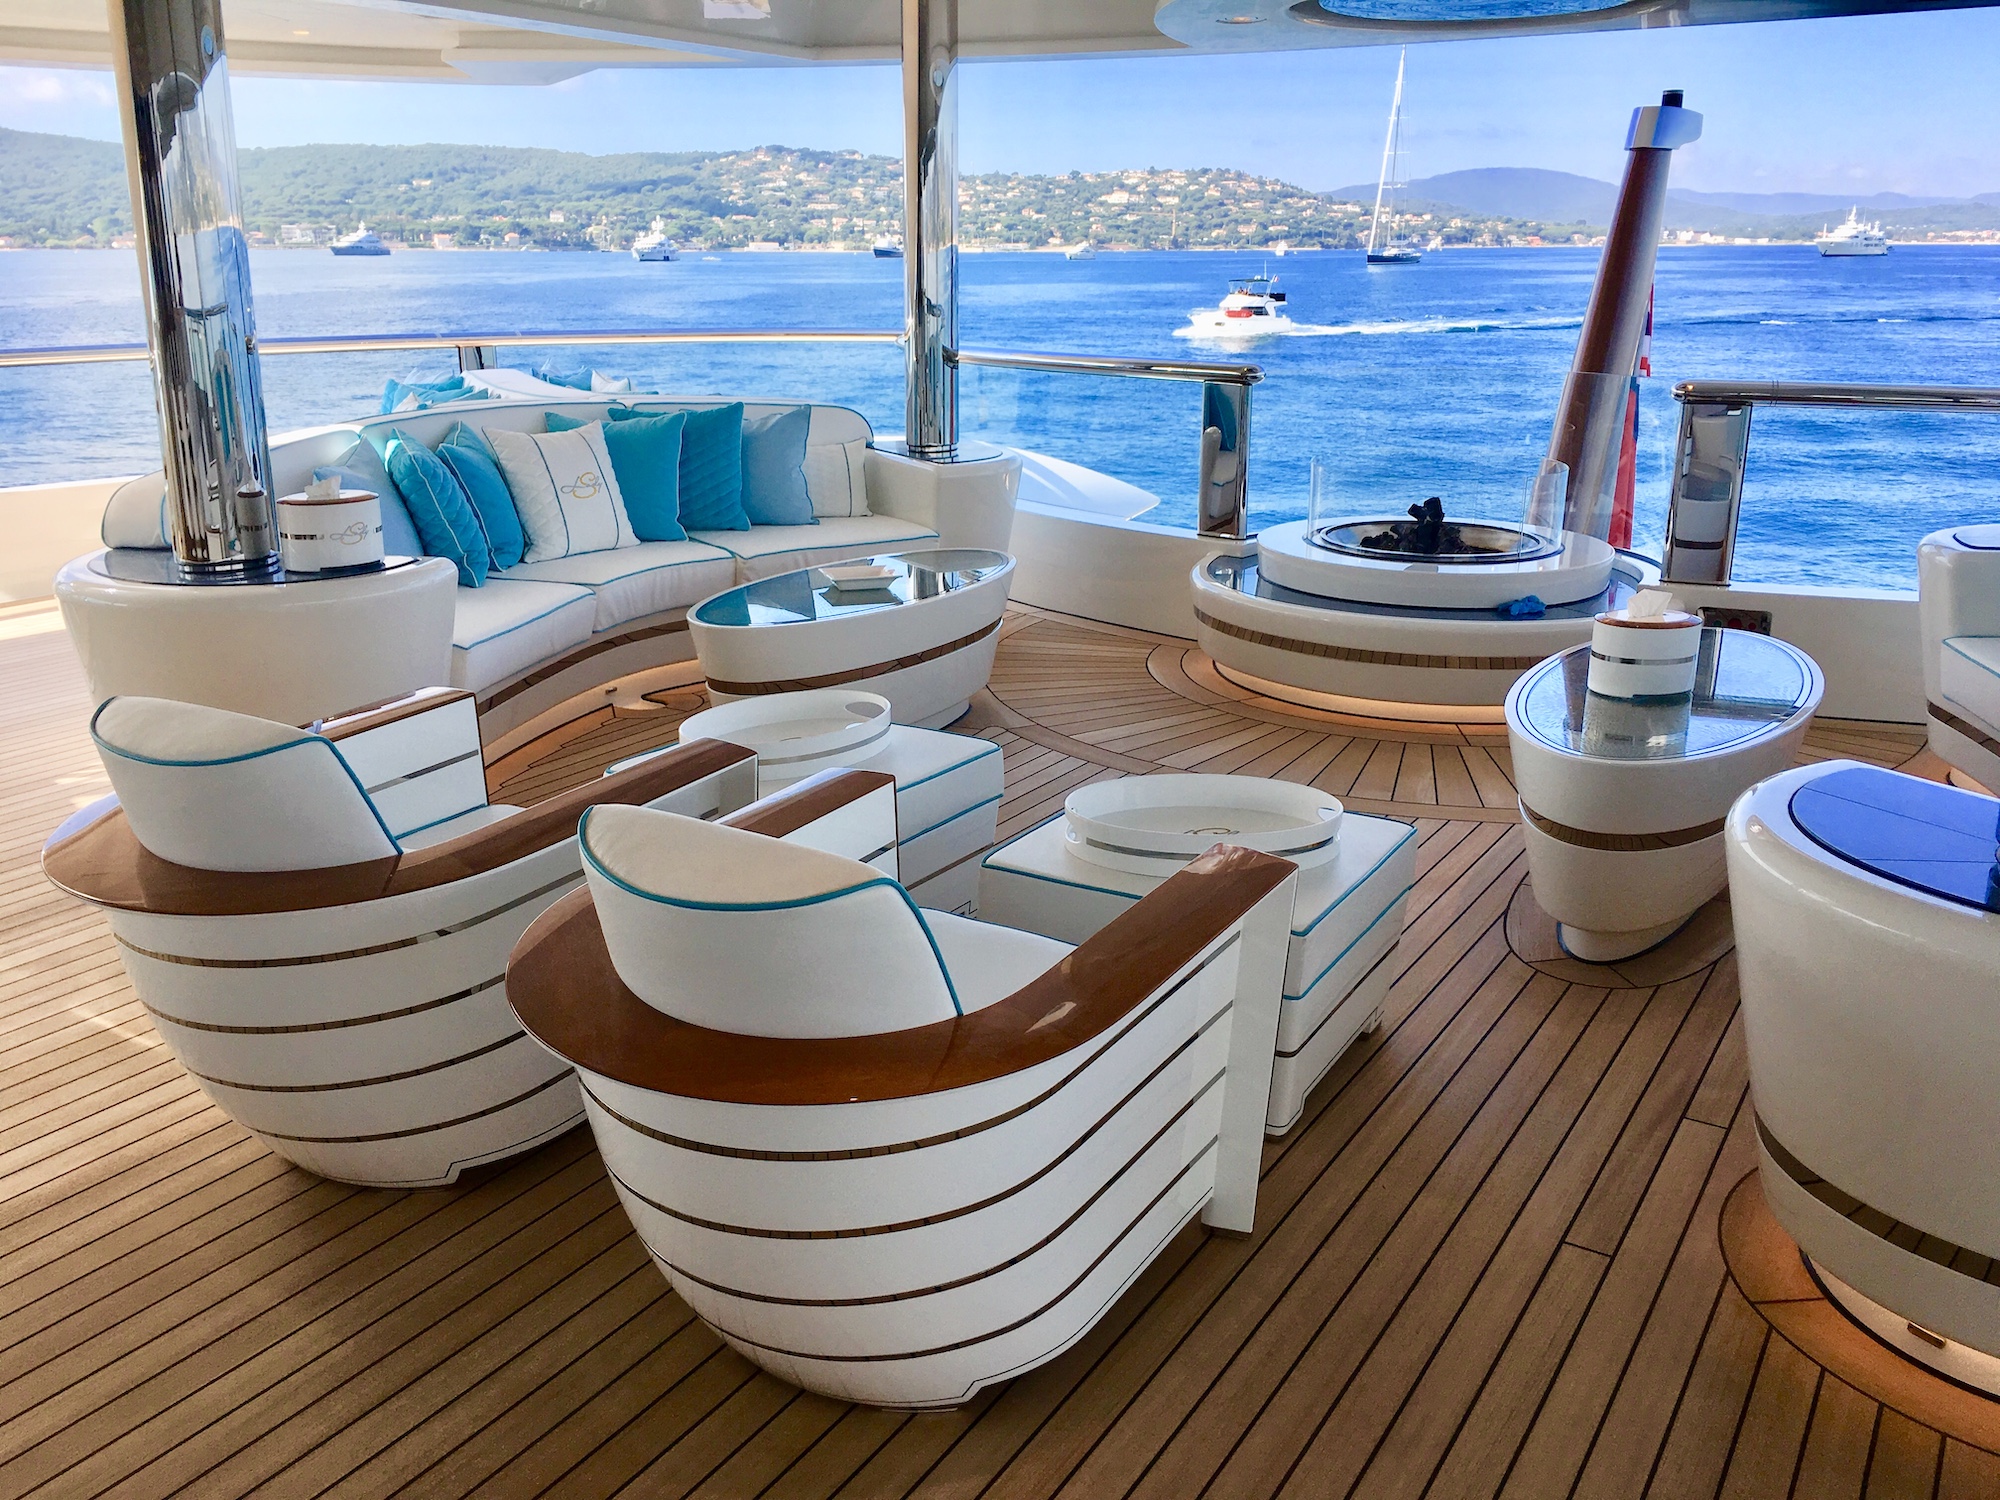 The super-bespoke, hand-crafted furniture of Gosling is highly suited to super-yacht installations